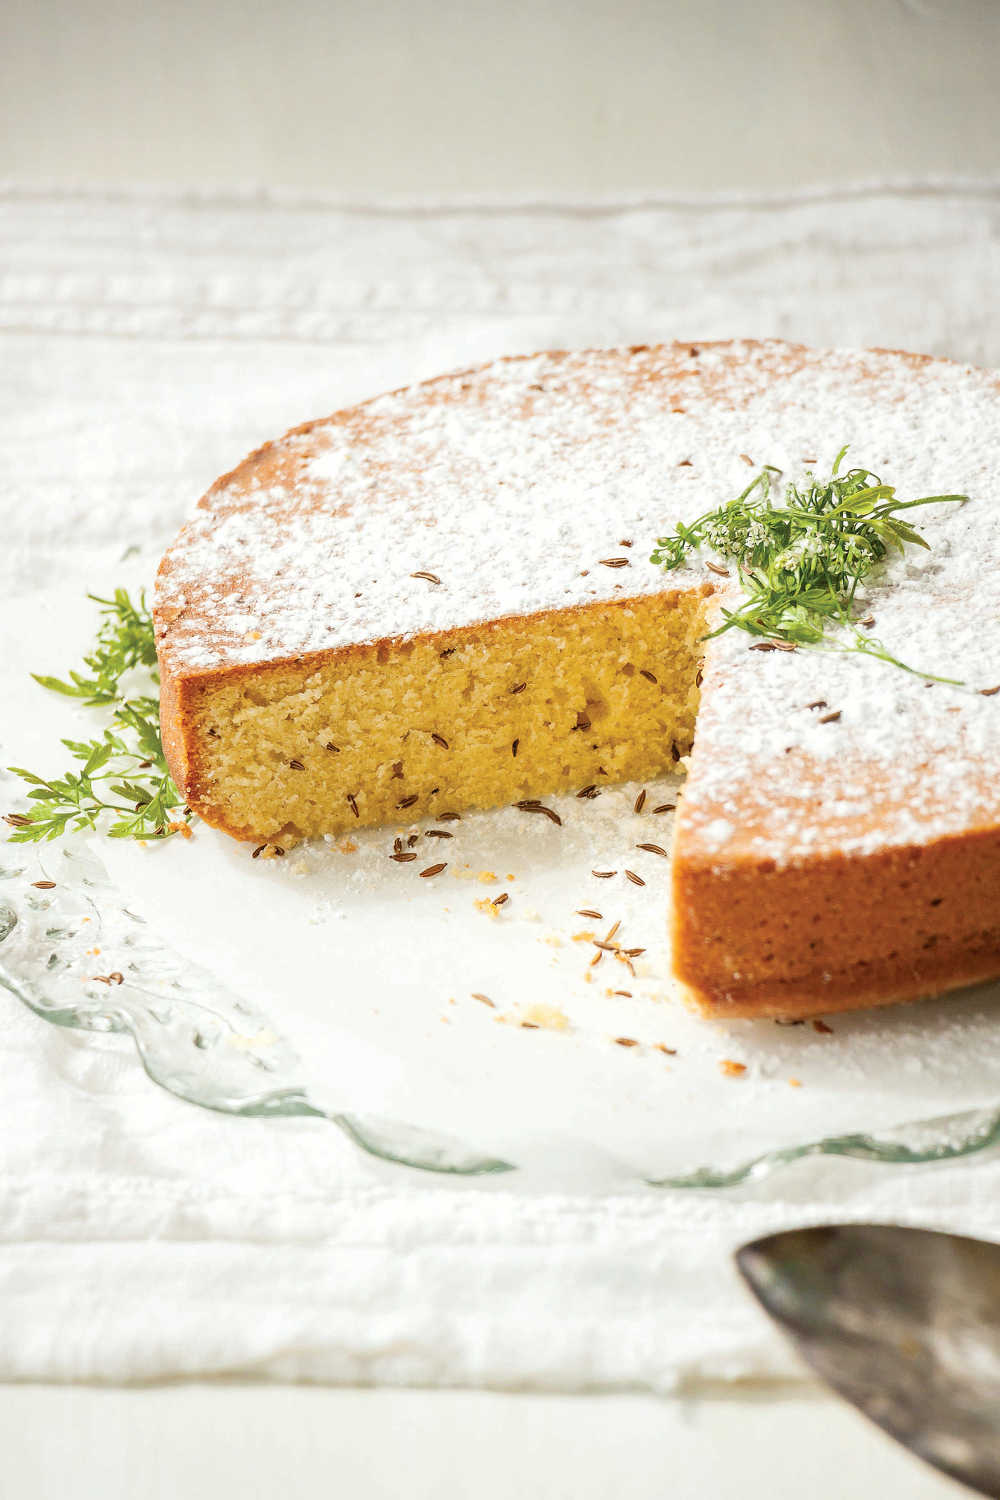 Imen McDonnell’s Sweet Caraway Seed Cake